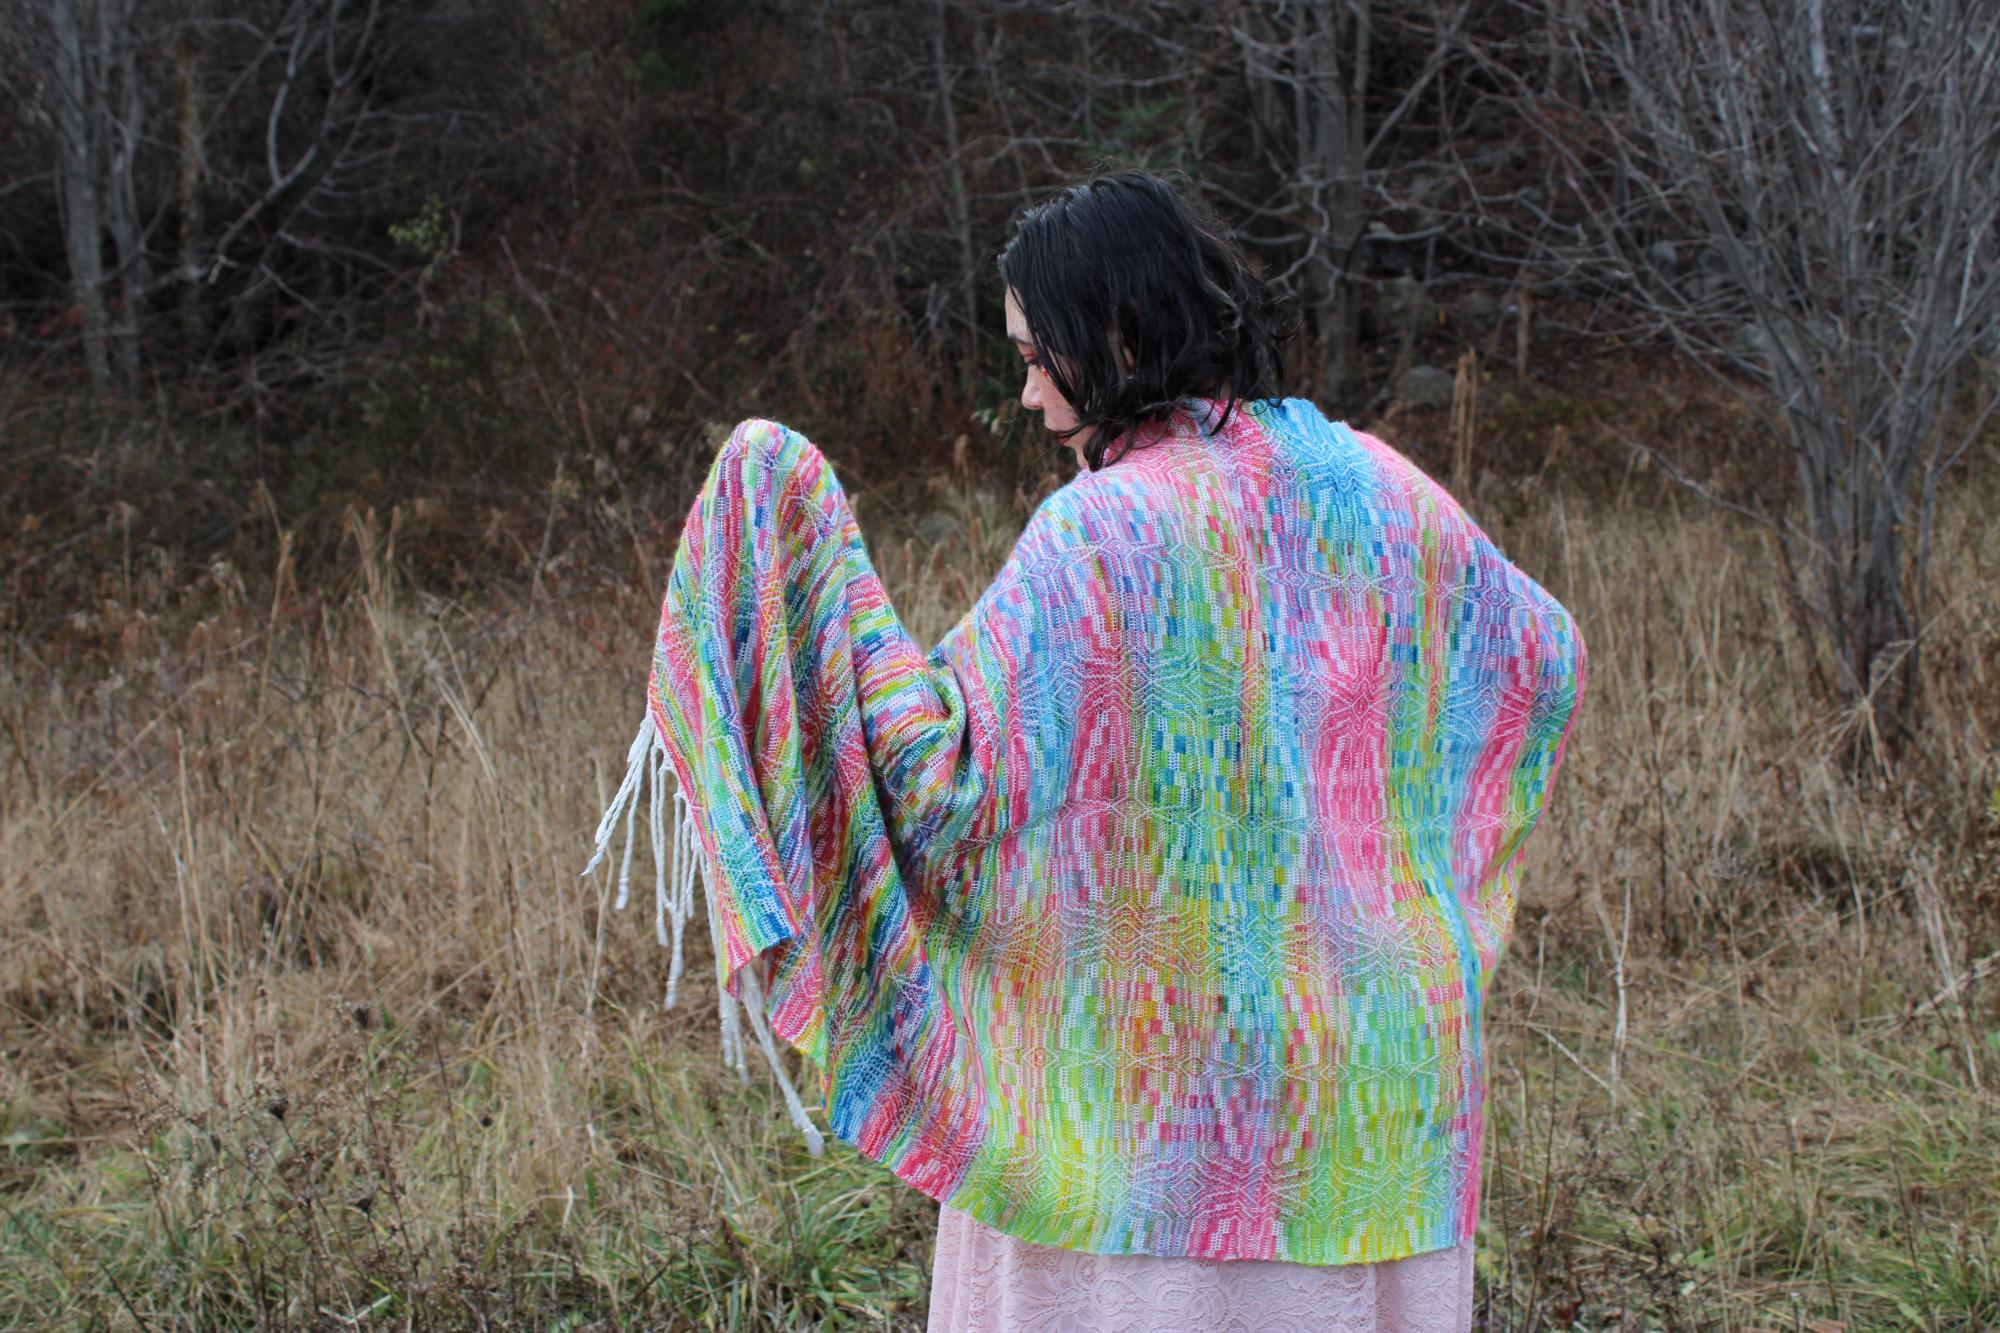 Person stands with rainbow floral shawl facing forest, hand outstretched, looking at part of shawl draped over hand.